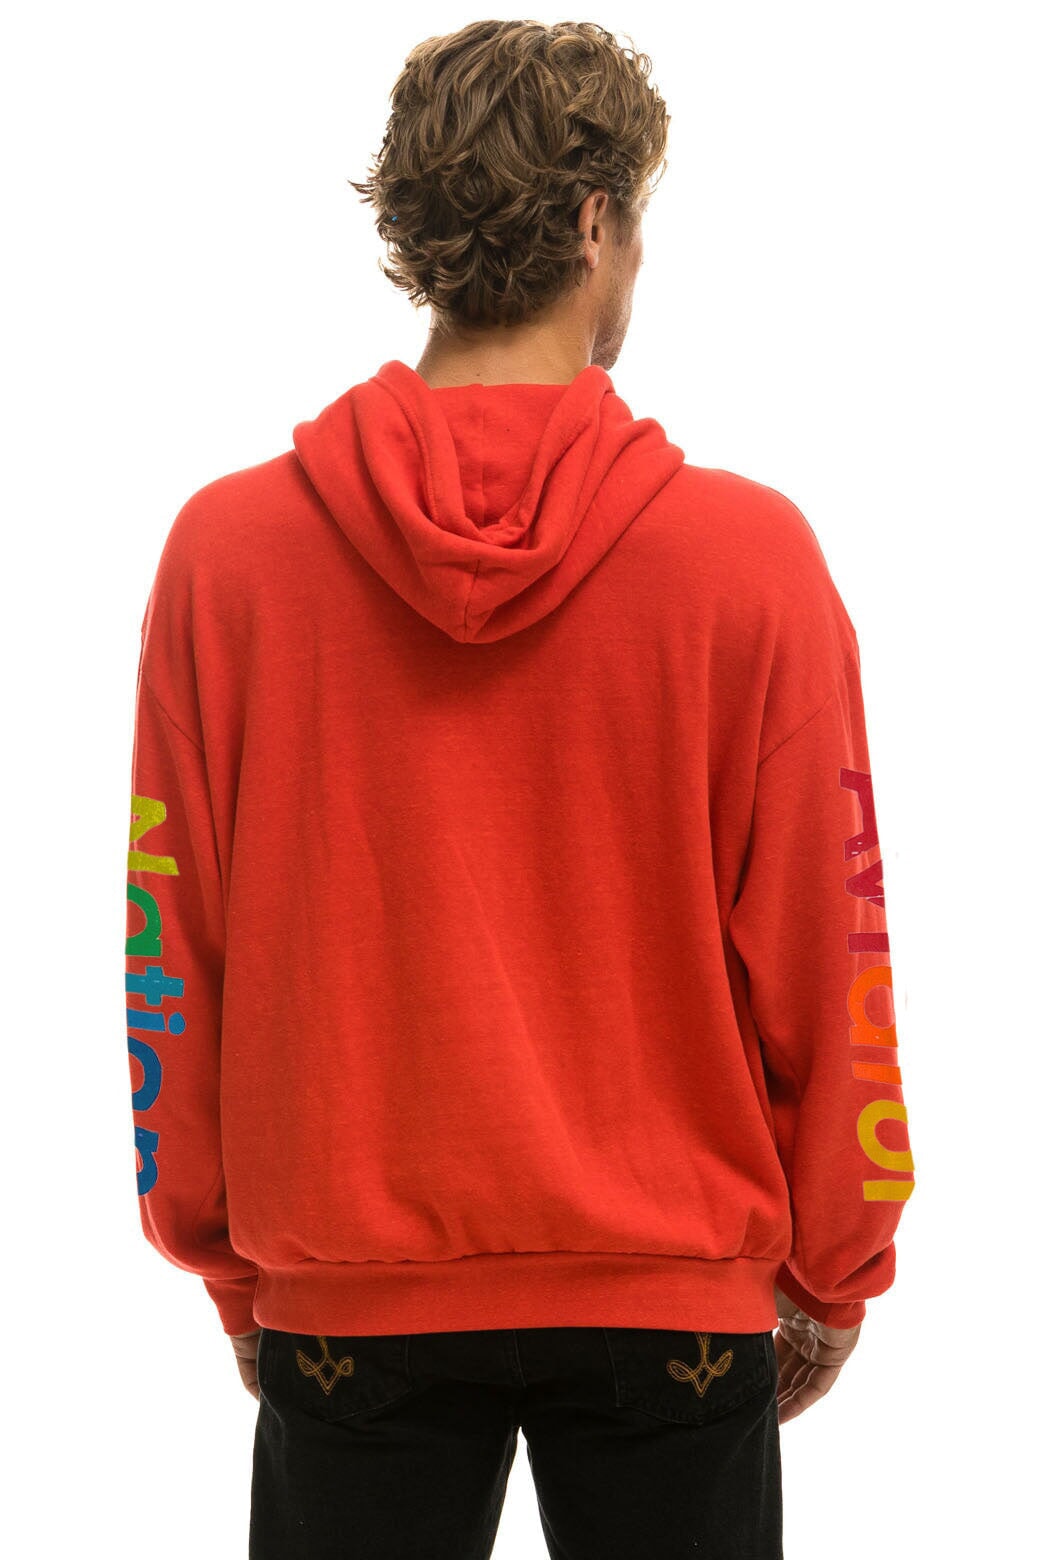 AVIATOR NATION HAMPTONS RELAXED PULLOVER HOODIE - RED Hoodie Aviator Nation 